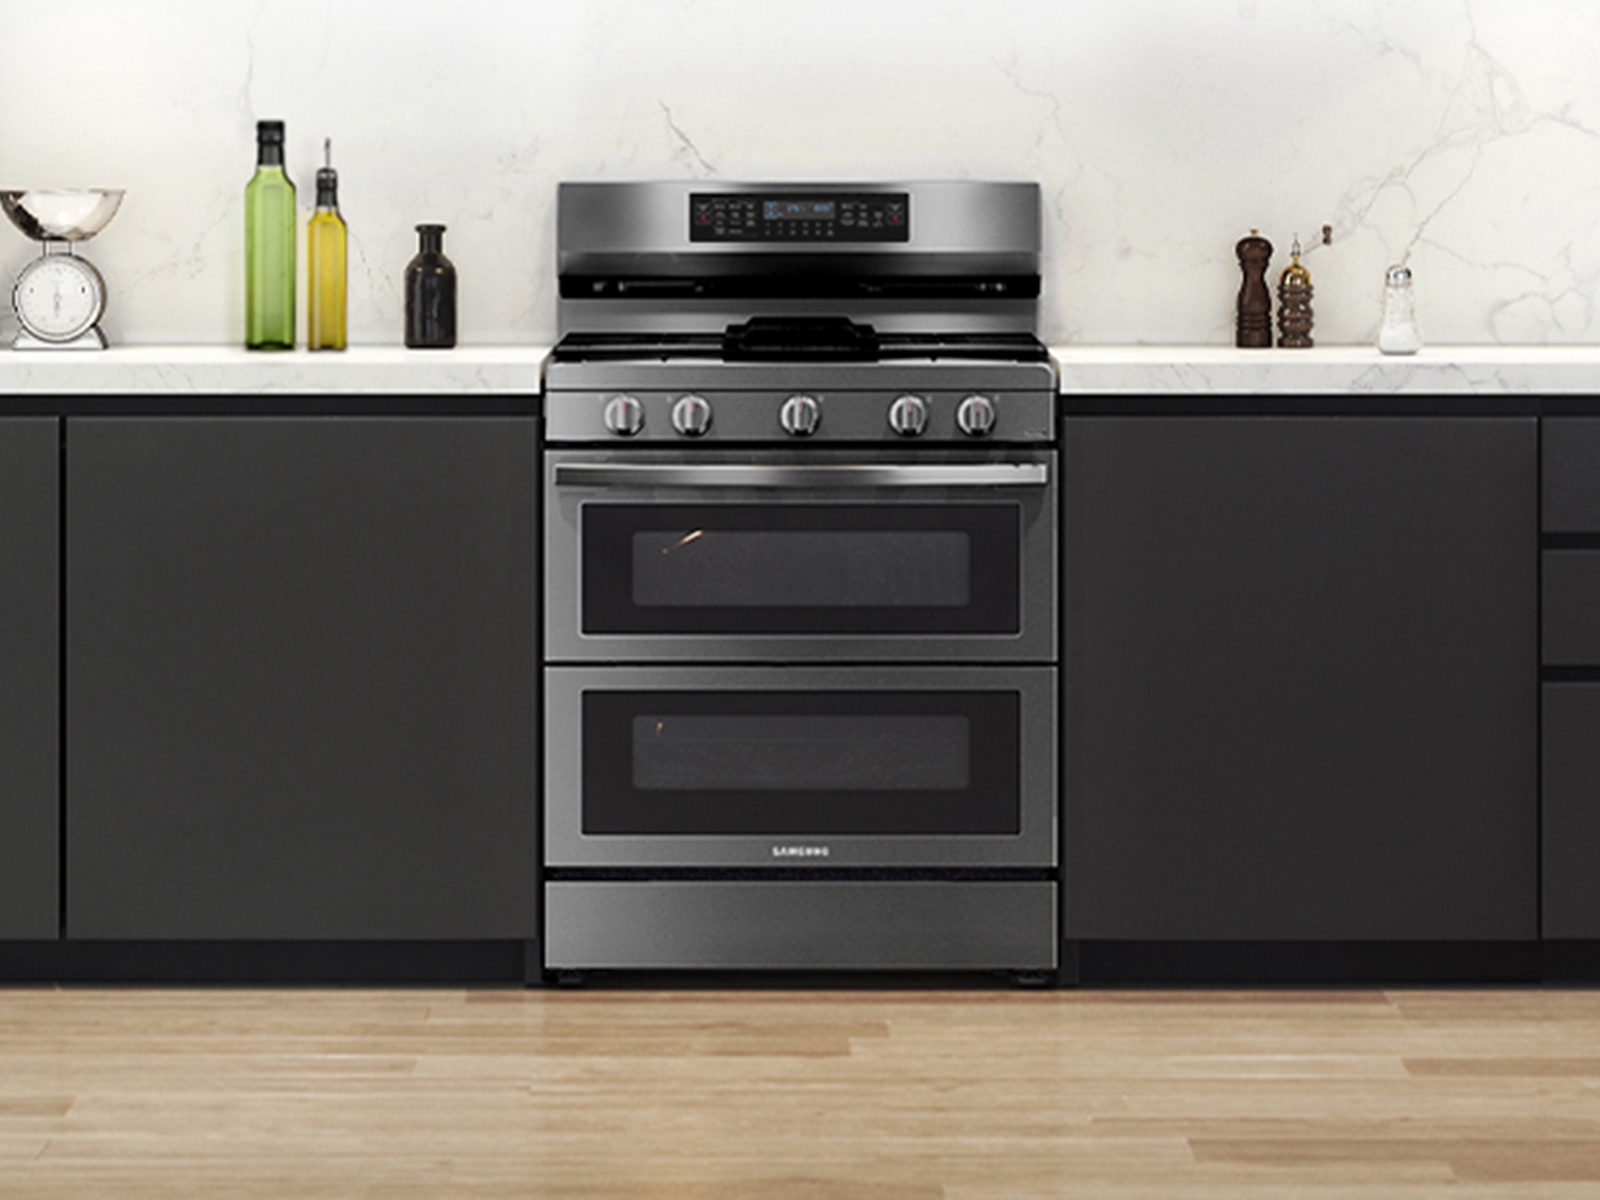 Samsung - Stainless Steel - Dual Fuel Ranges - Ranges - The Home Depot